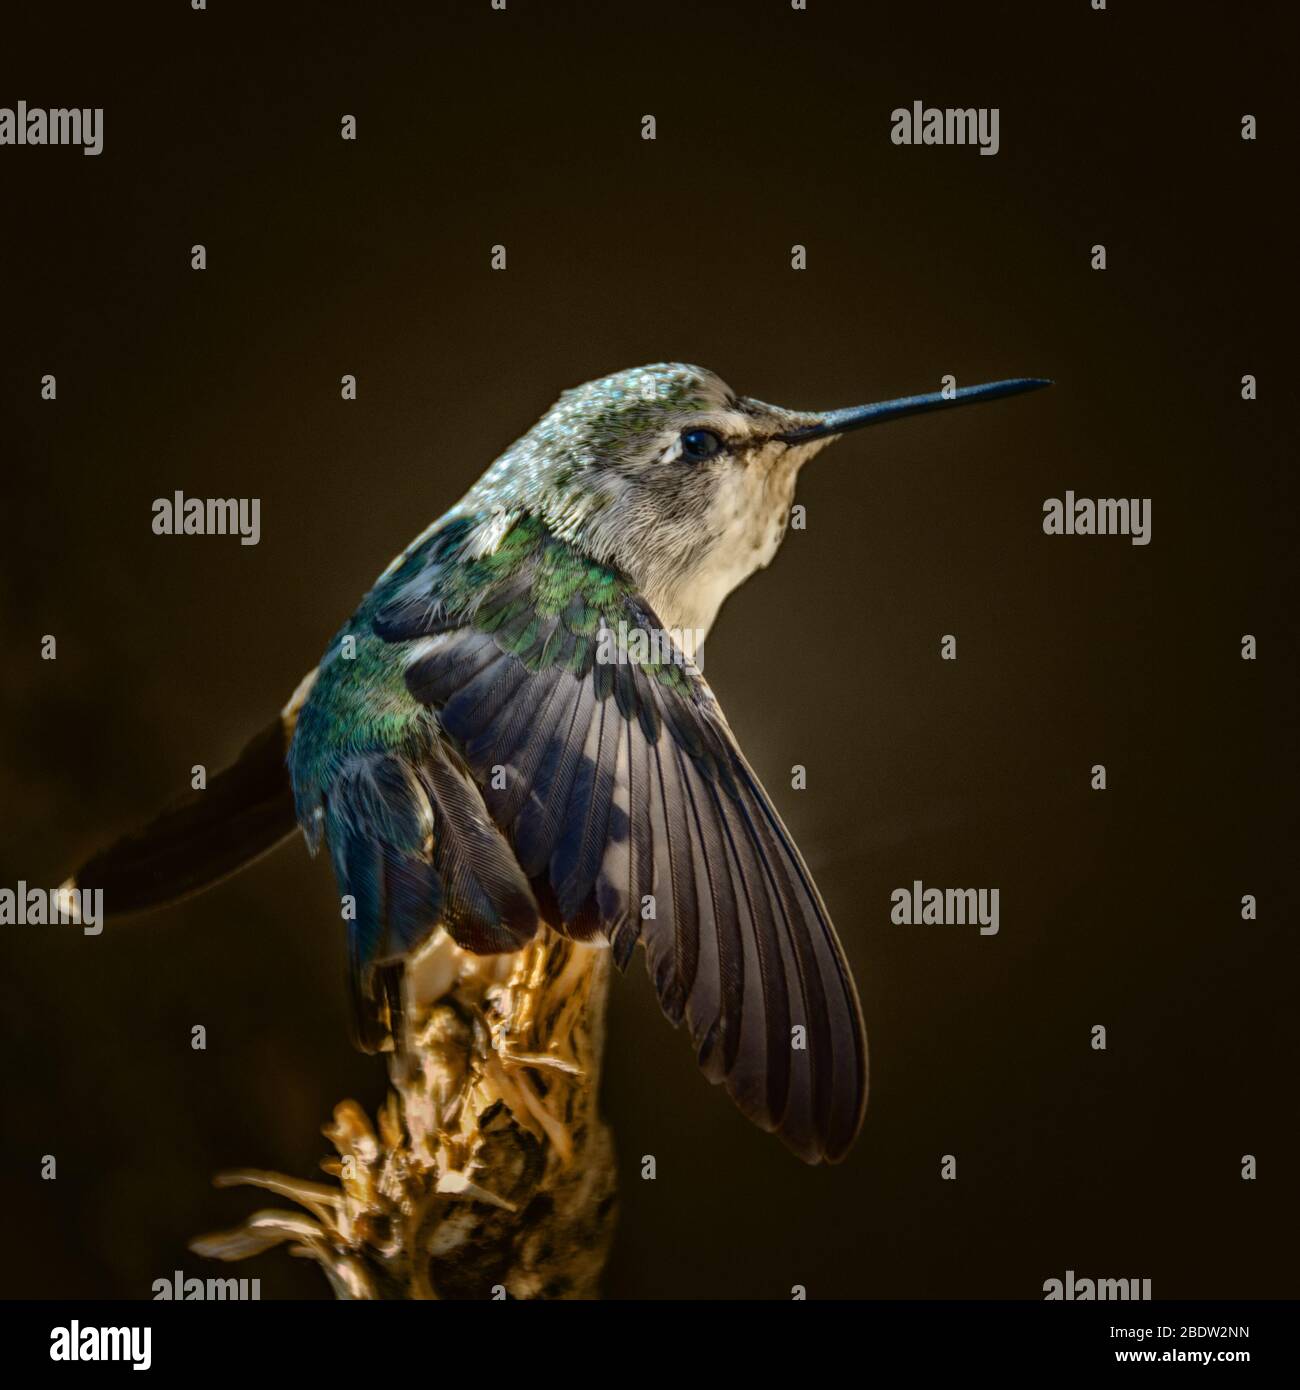 Hummingbird Isolated on Dark Brown Background with Translucent Wing Stock Photo